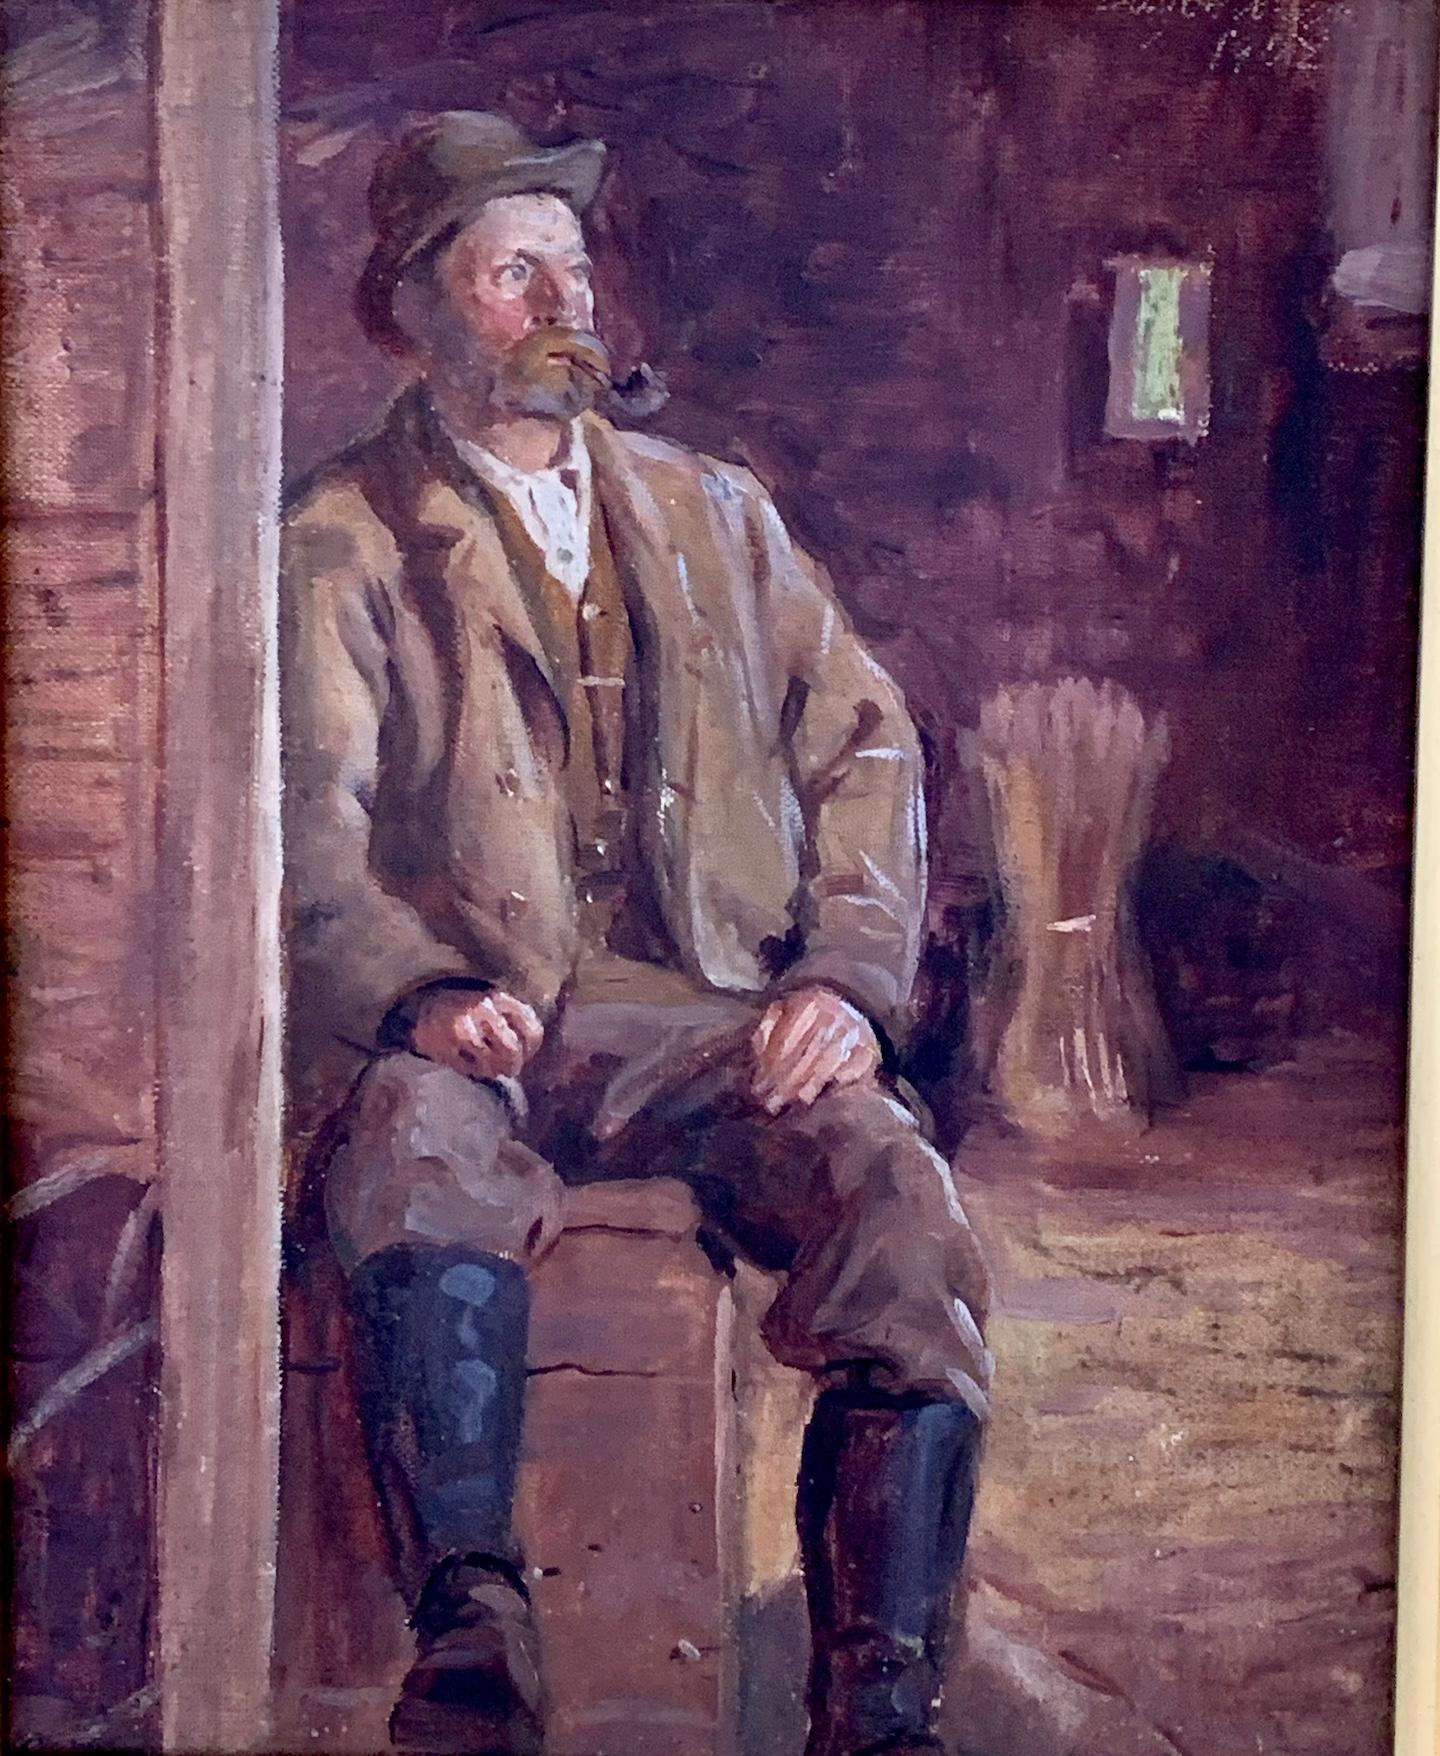 19th century Irish portrait of a man, smoking a Pipe, seated in a barn interior. - Painting by Irish School